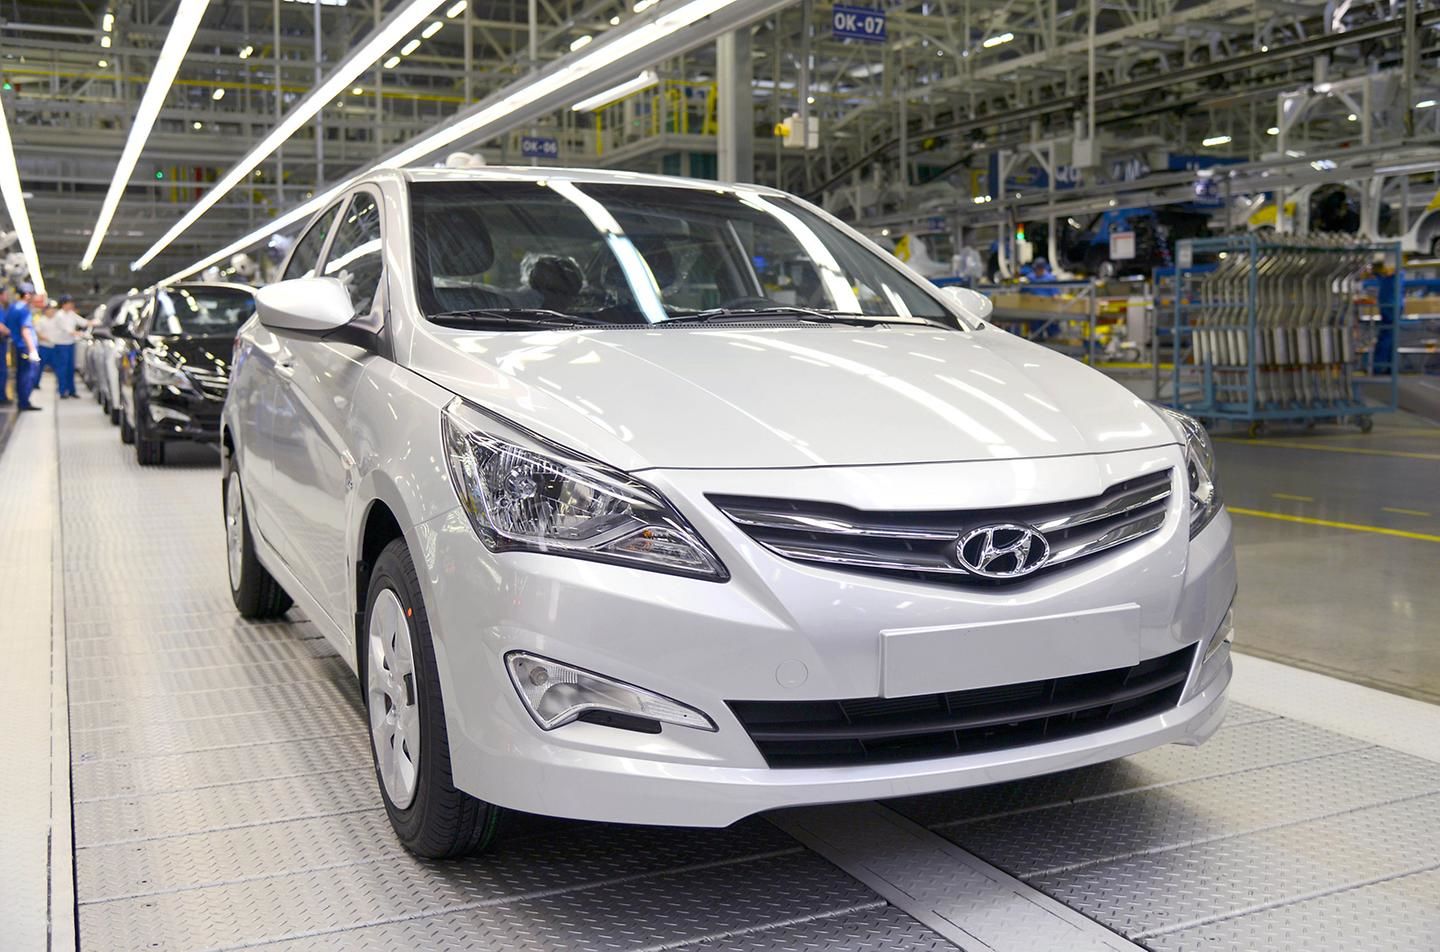 Hyundai Motor Manufactures One Millionth Car at Its Plant in Russia